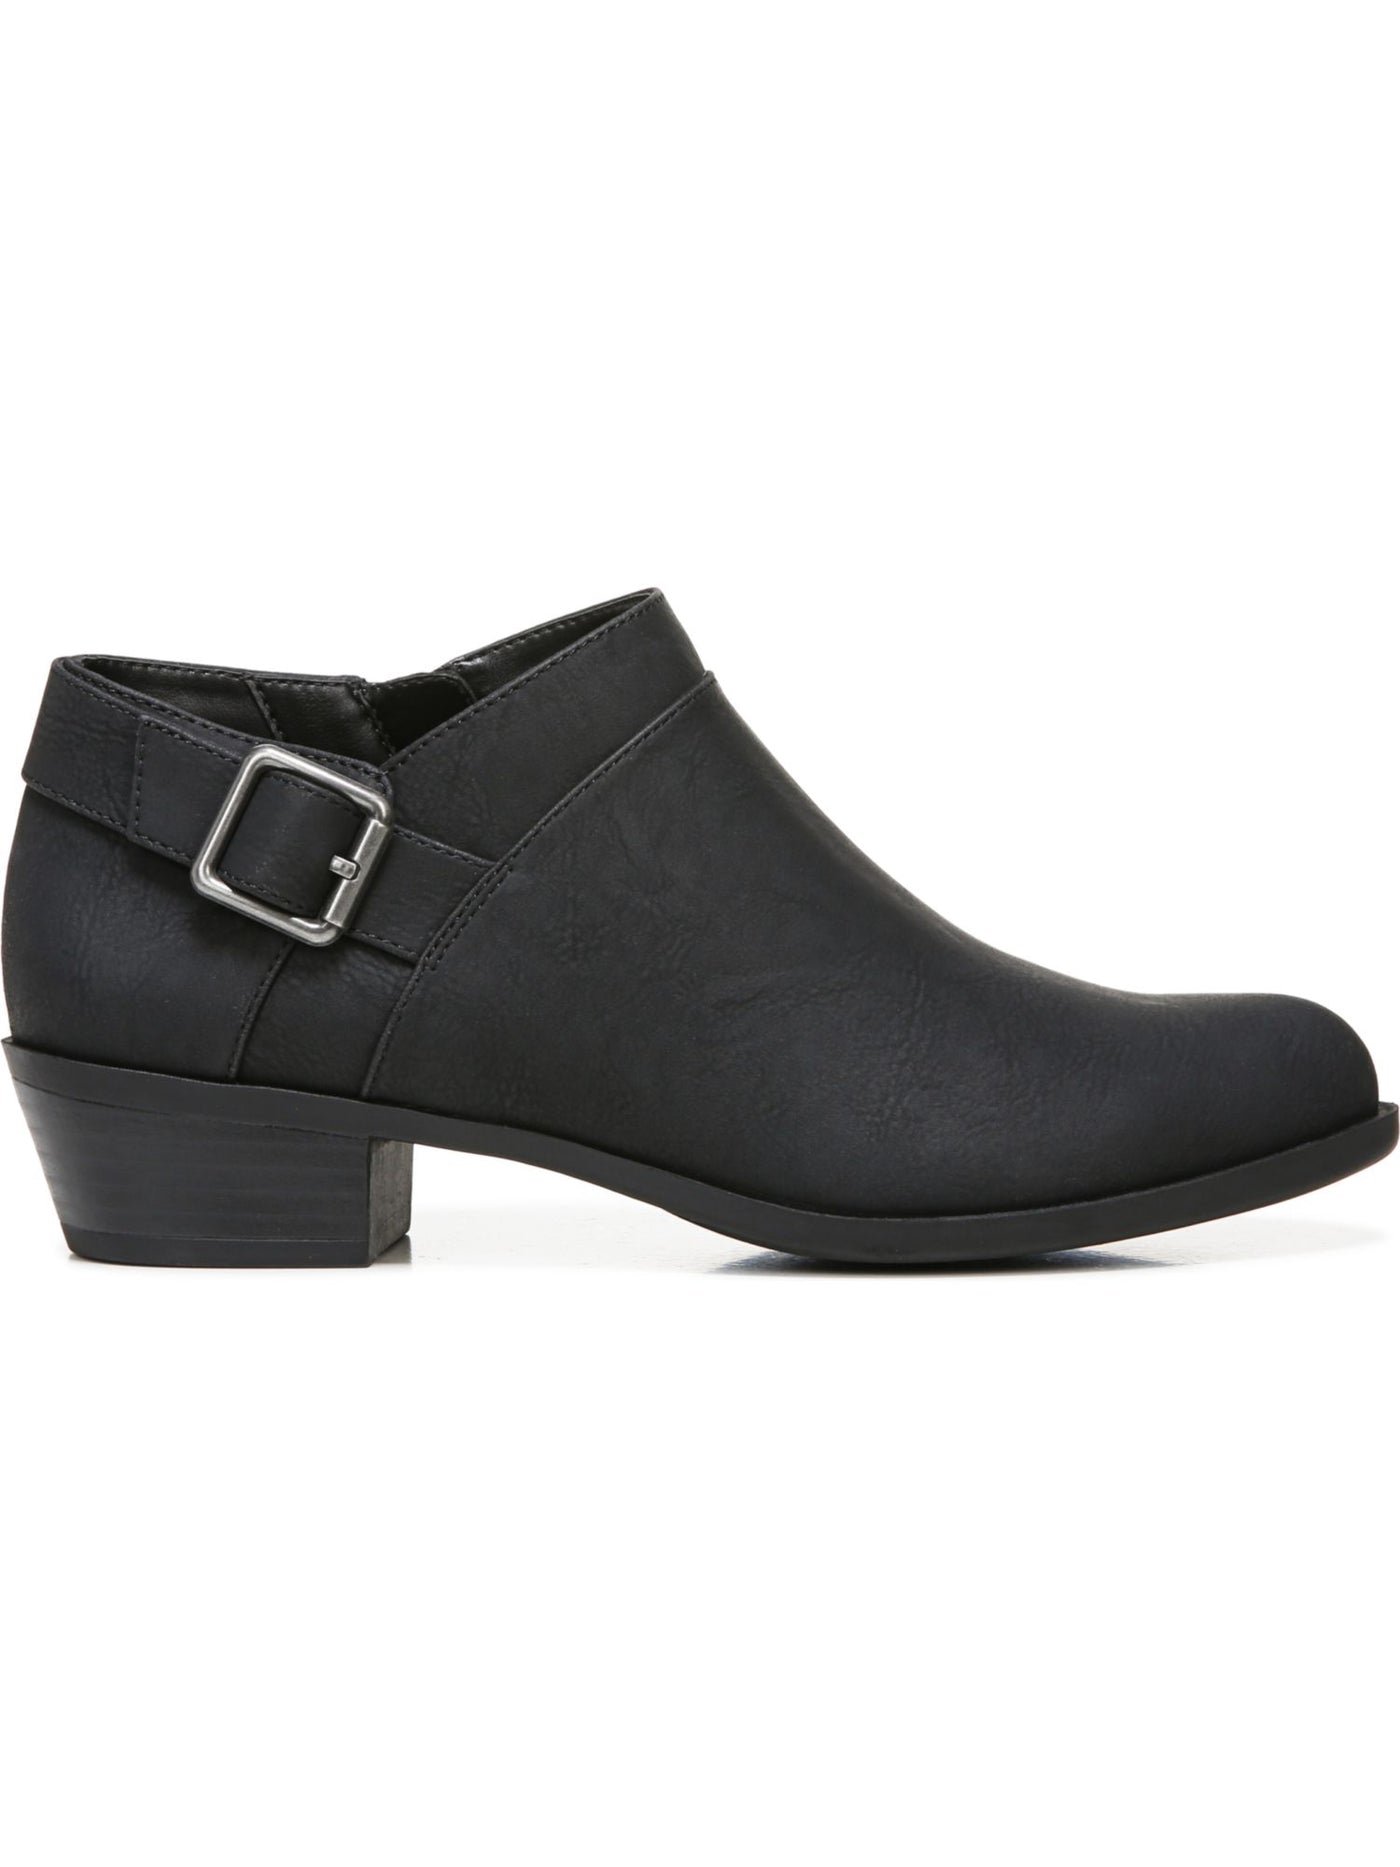 LIFE STRIDE VELOCITY Womens Black Cushioned Buckle Accent Alexi Almond Toe Block Heel Zip-Up Shootie 6.5 W